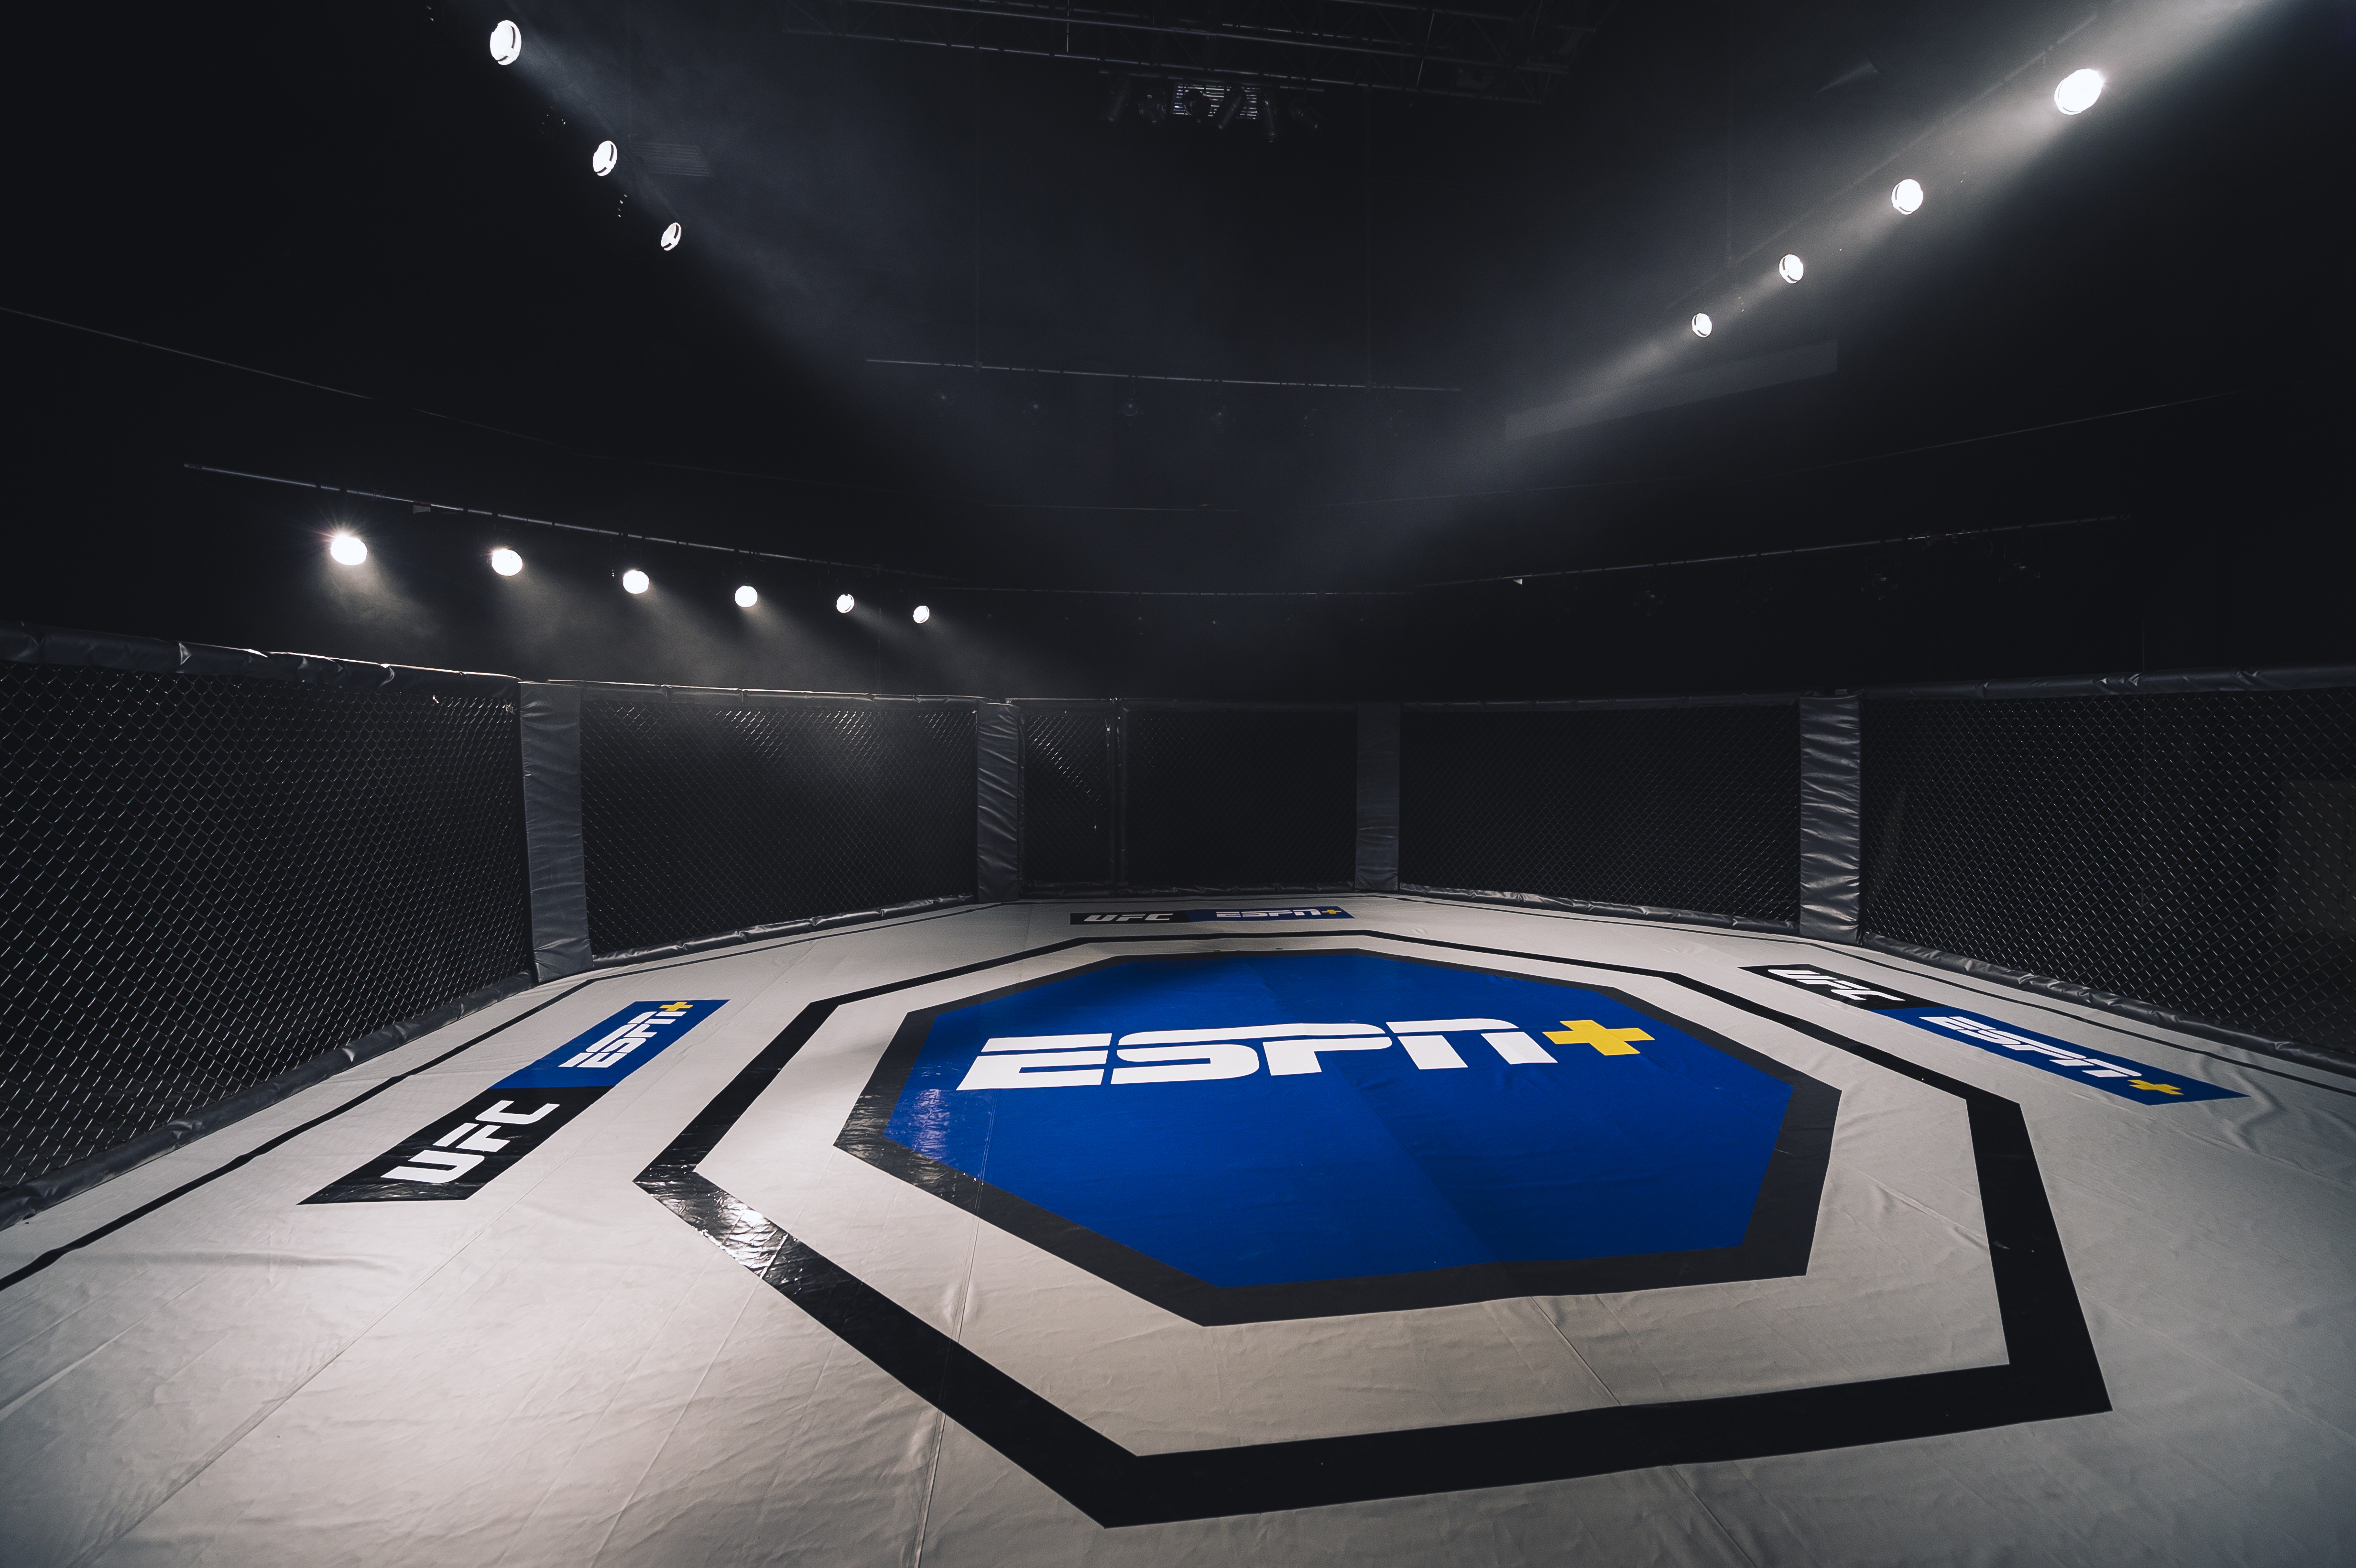 HD wallpaper of an empty UFC octagon with ESPN+ logo, spotlighted in an arena setting, perfect as a desktop background for mixed martial arts enthusiasts.